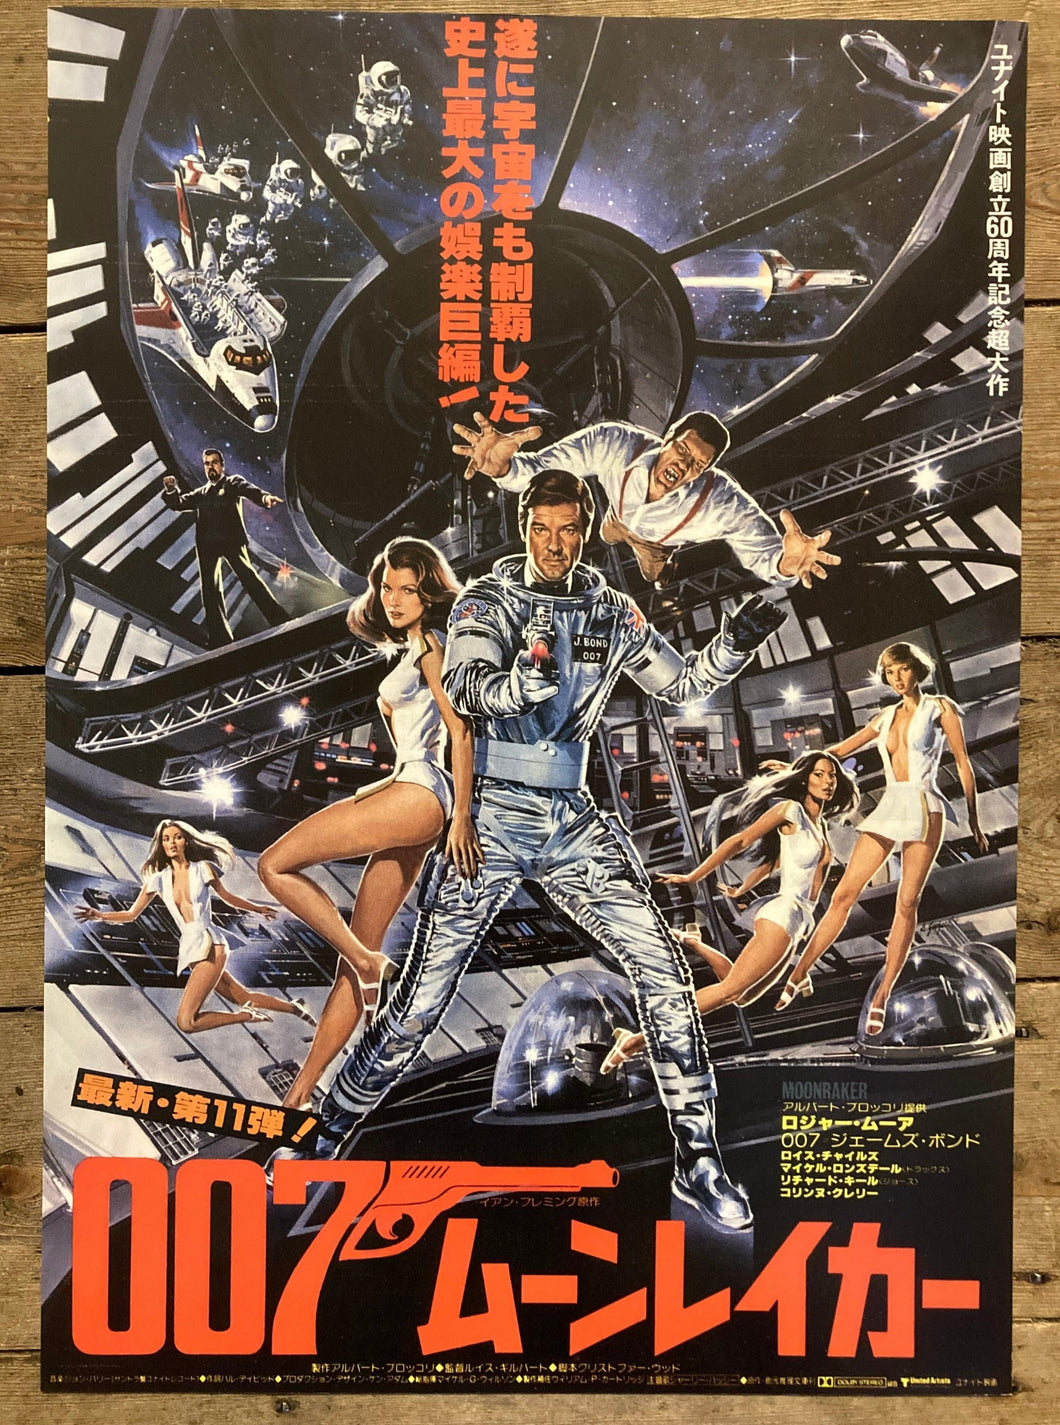 James Bond movie film poster - Roger Moore Moonraker 1979 Japanese design large A2 size reprint - Original Music and Movie Posters for sale from Bamalama - Online Poster Store UK London